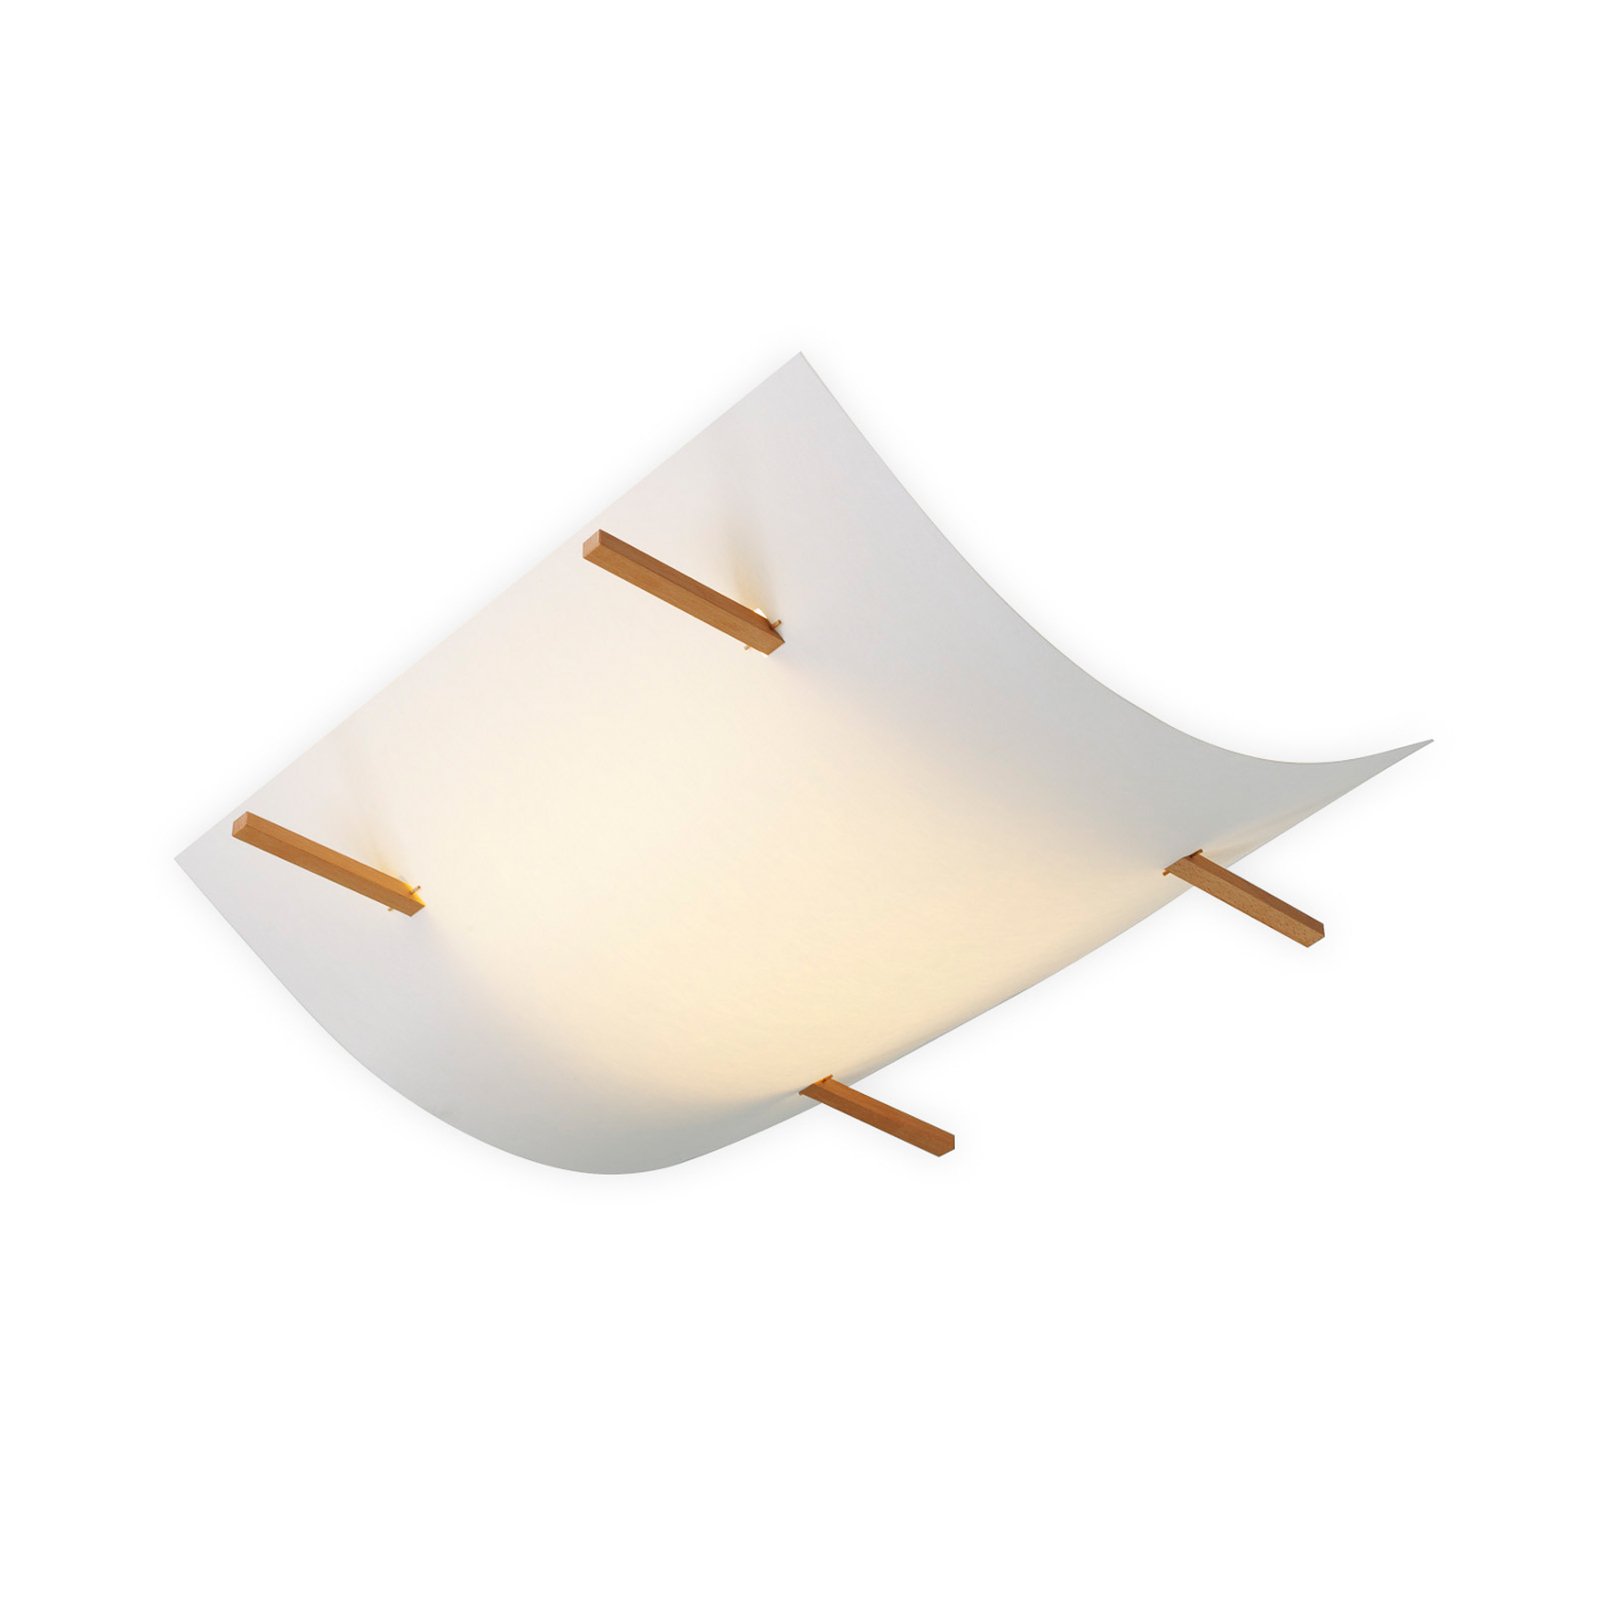 Folio ceiling light with a Lunopal lampshade